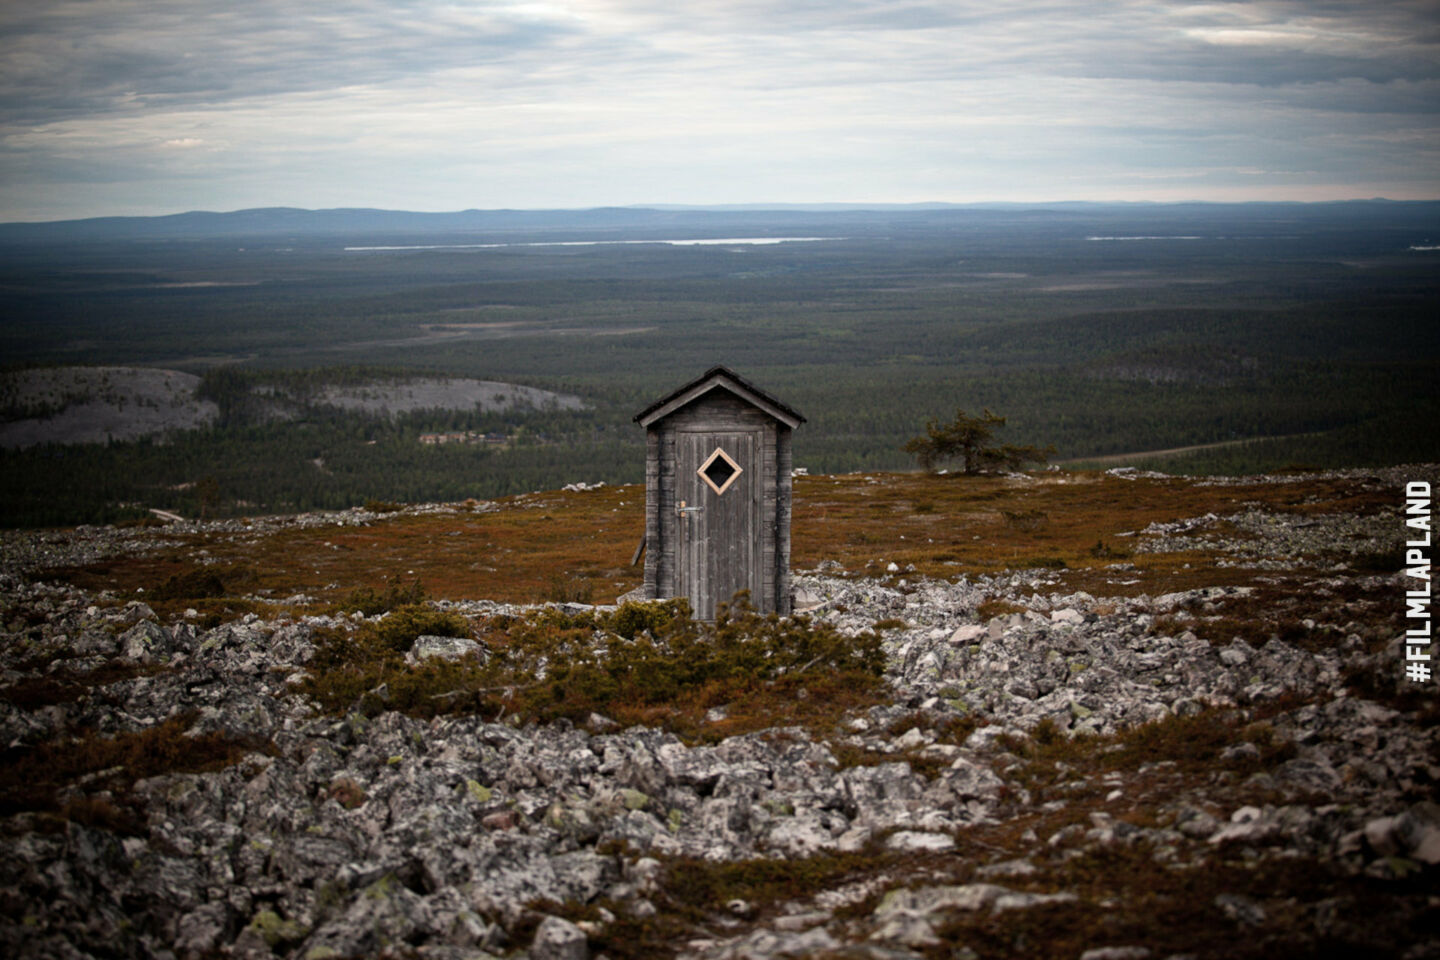 Autumn colors in Sodankylä, a feature of filming in Finnish Lapland locations